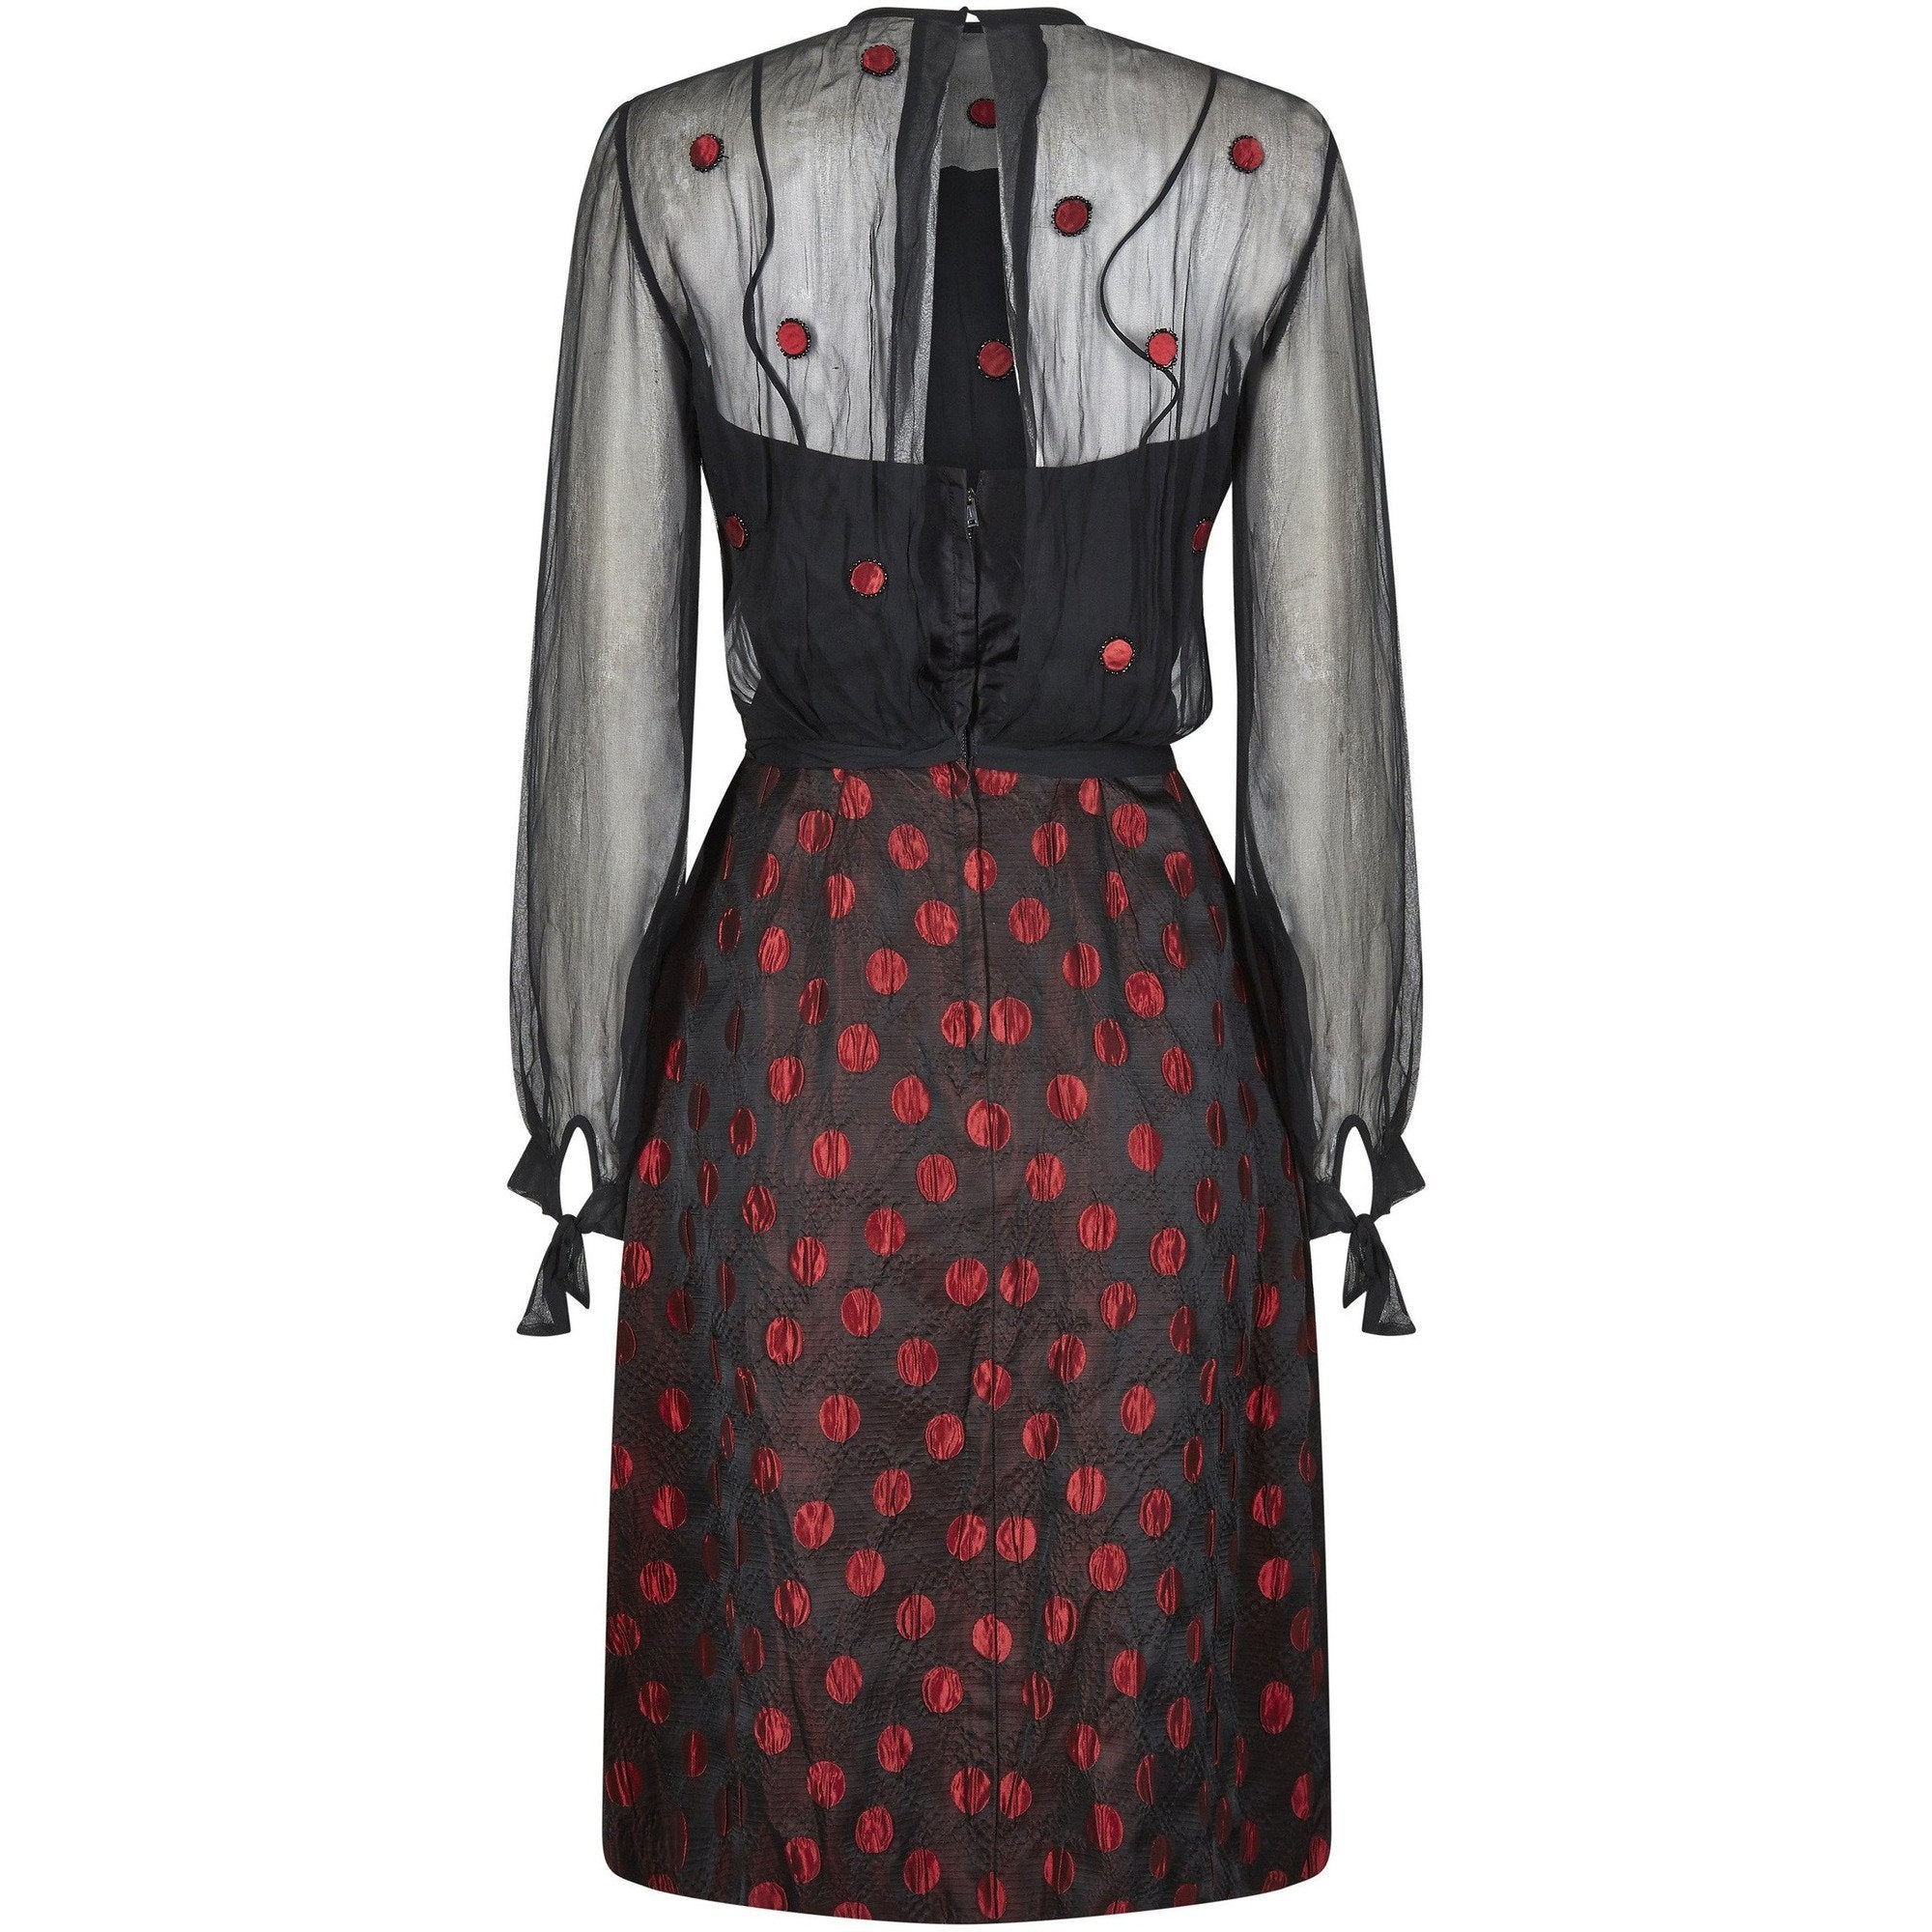 1960s Black and Red Polka Dot Demi Couture Dress and Jacket With Chiffon Bodice